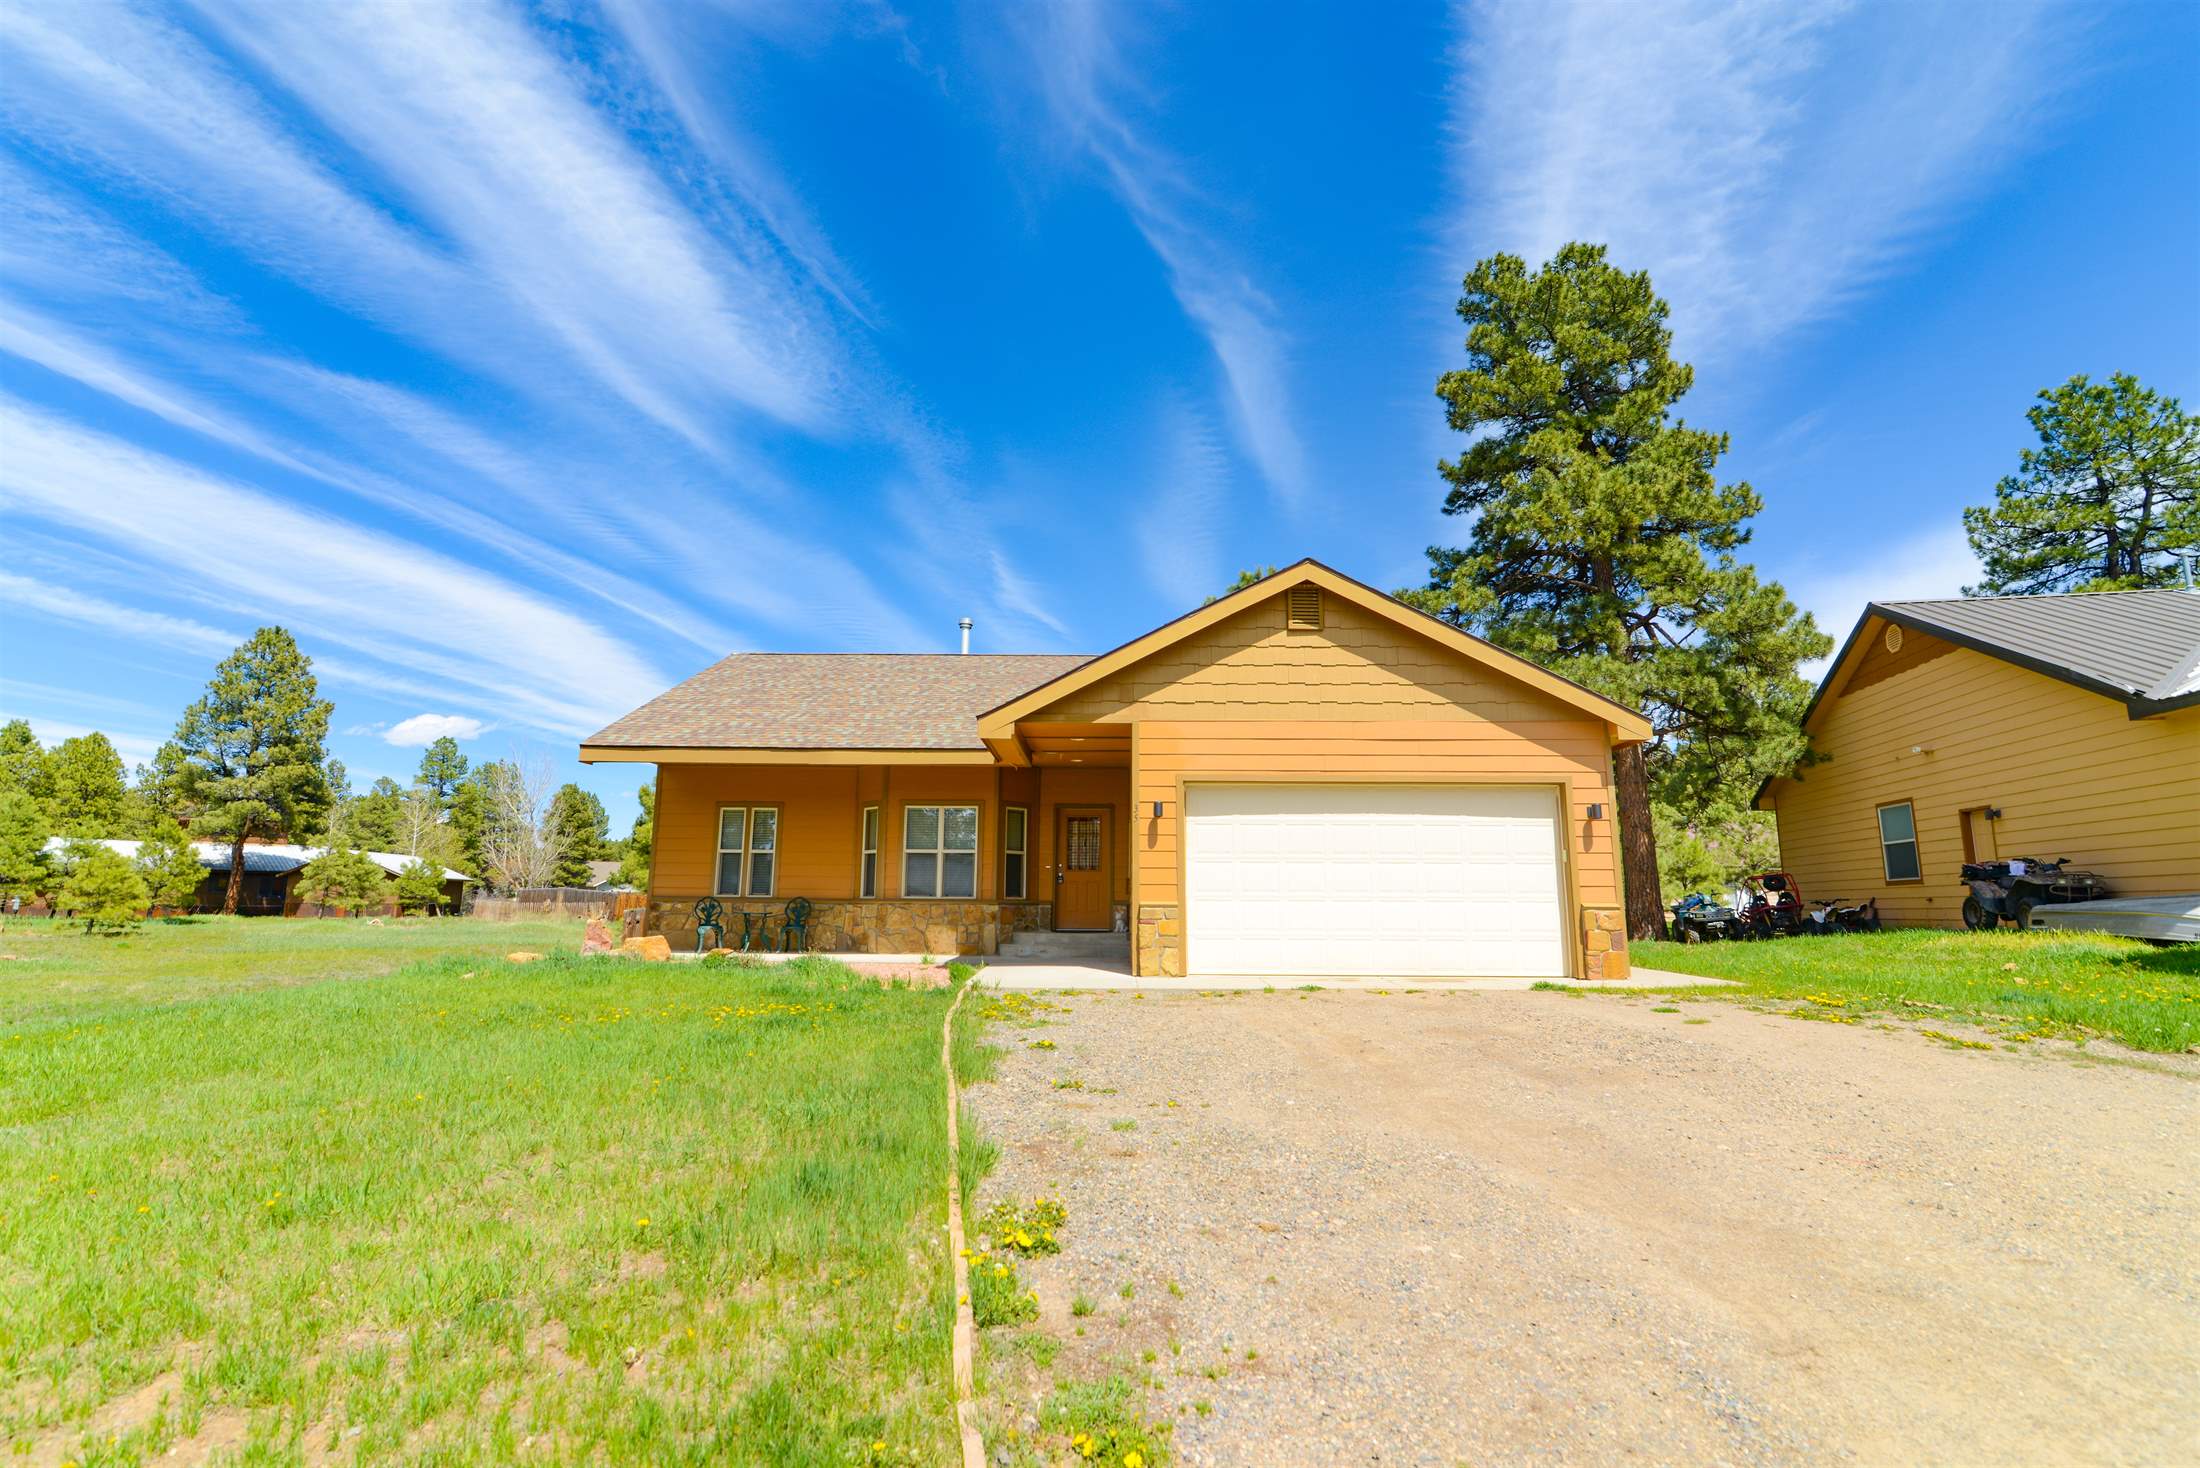 Chipper's Abode, #35 Chipper Ct - Short Term, Pagosa Springs, CO 81147